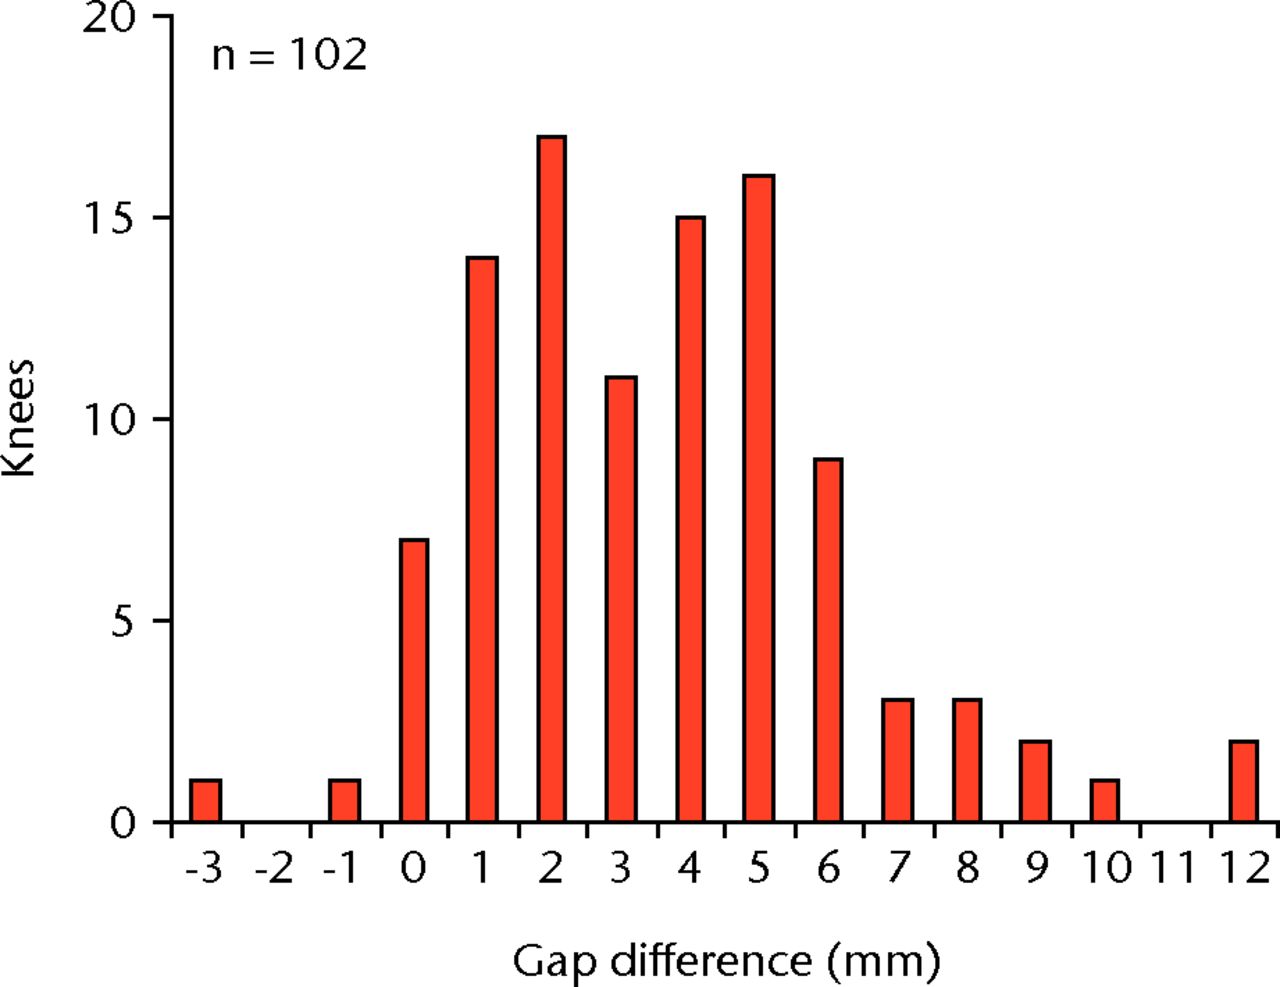 Figs. 4a - 4b 
          
            Figure 4a – Graph showing gap difference
between the extension gap and the corrected flexion gap. The mean
of the difference was 3.6 mm (sd 2.7) and the variation
of the difference was wide. Figure 4b – Graph showing gap difference
by group. GroupÂ A: pre-operative flexion contracture <
 20°. Group
B: flexion contracture ≥ 20°. The mean differences between extension
and corrected flexion gaps were 3.4 mm (sd 2.5) in group
A and 3.9 mm (sd 3.0) in group B, (p = 0.42). Additionally,
if groups A and B are divided at flexion contracture of 15°, 25°
and 30°, the p-values are 0.39, 0.38 and 0.20 respectively. 
        